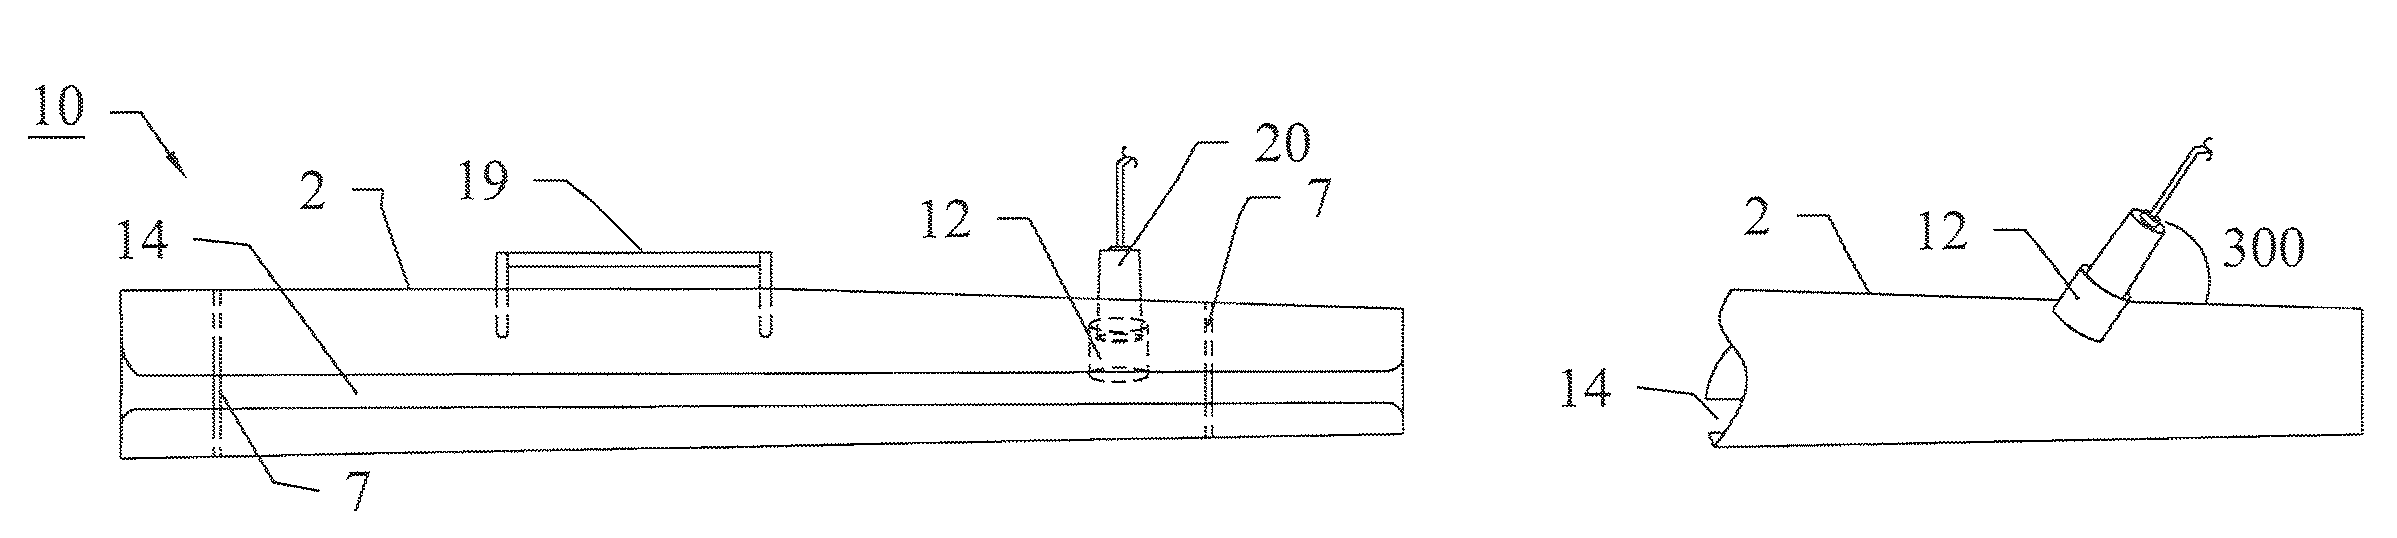 Devices and methods for heating pipes or tubing